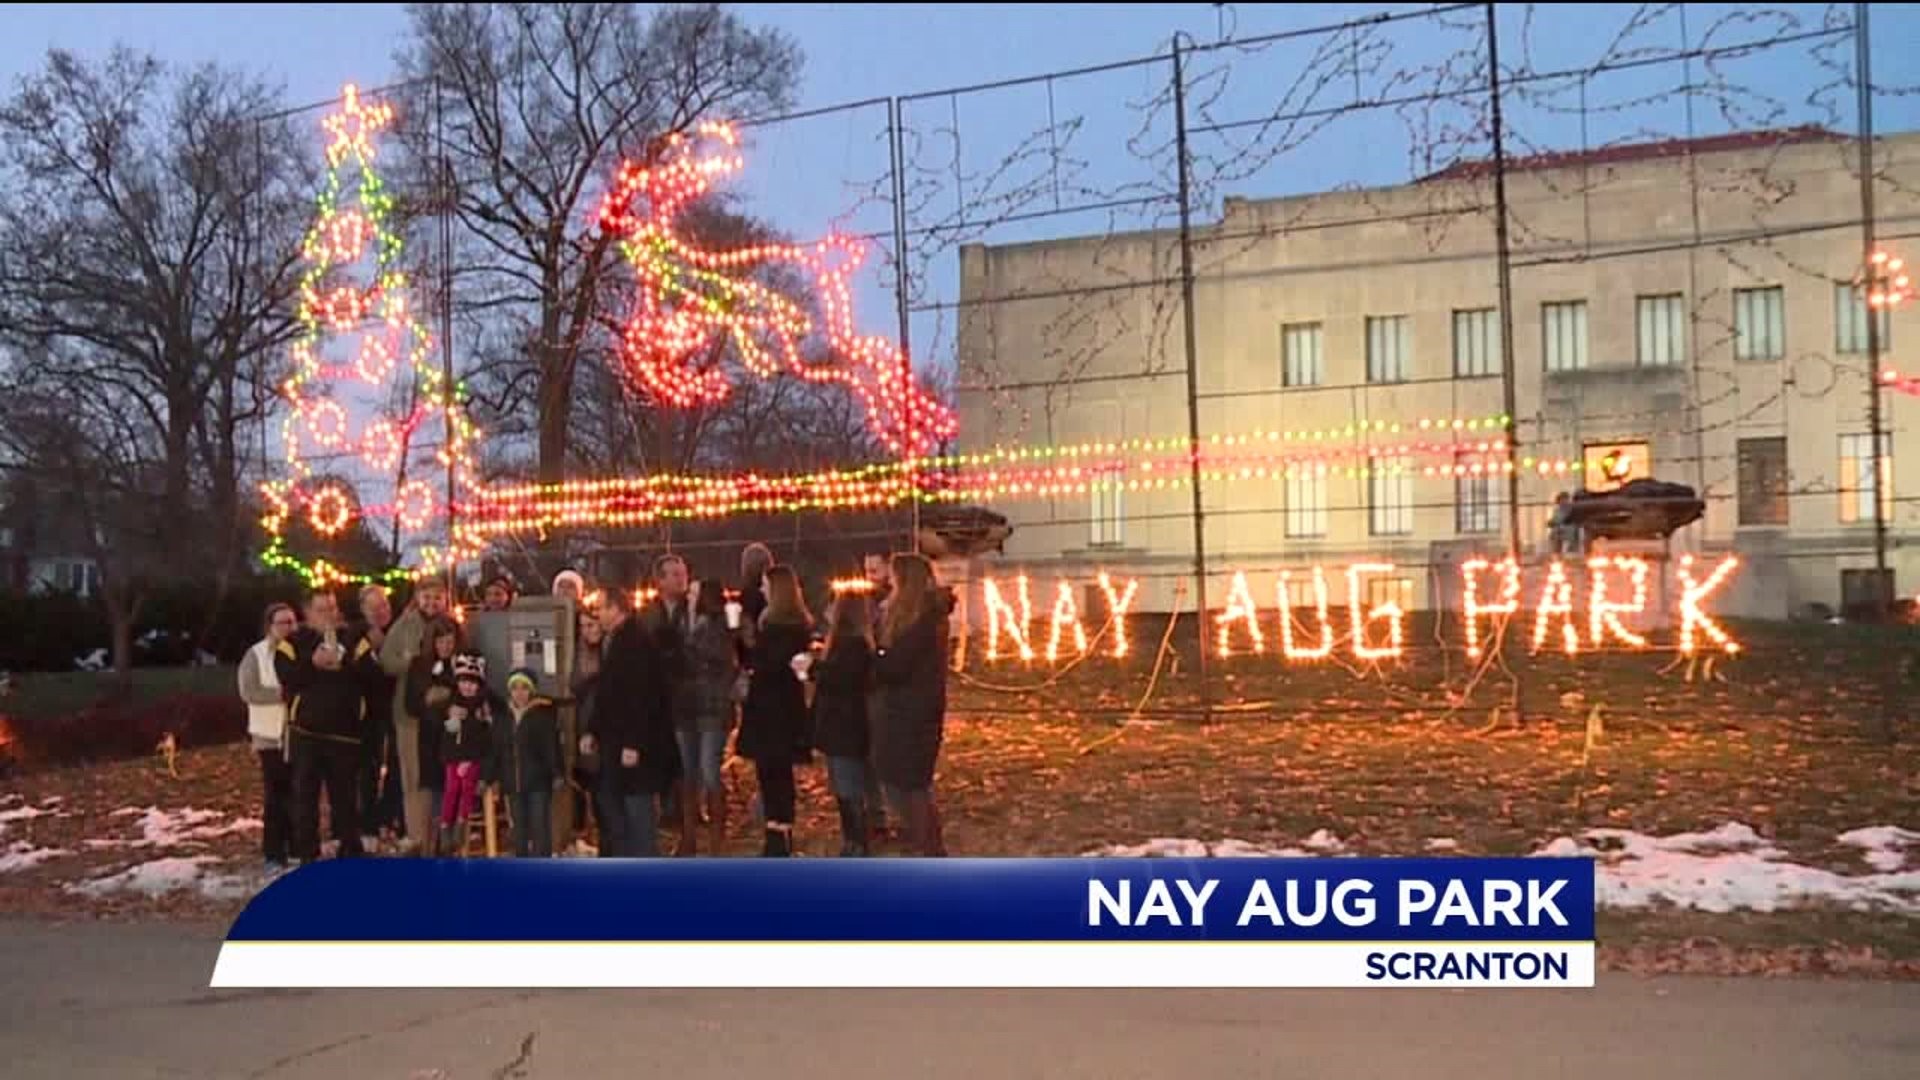 Christmas Light Show On at Nay Aug Park in Scranton